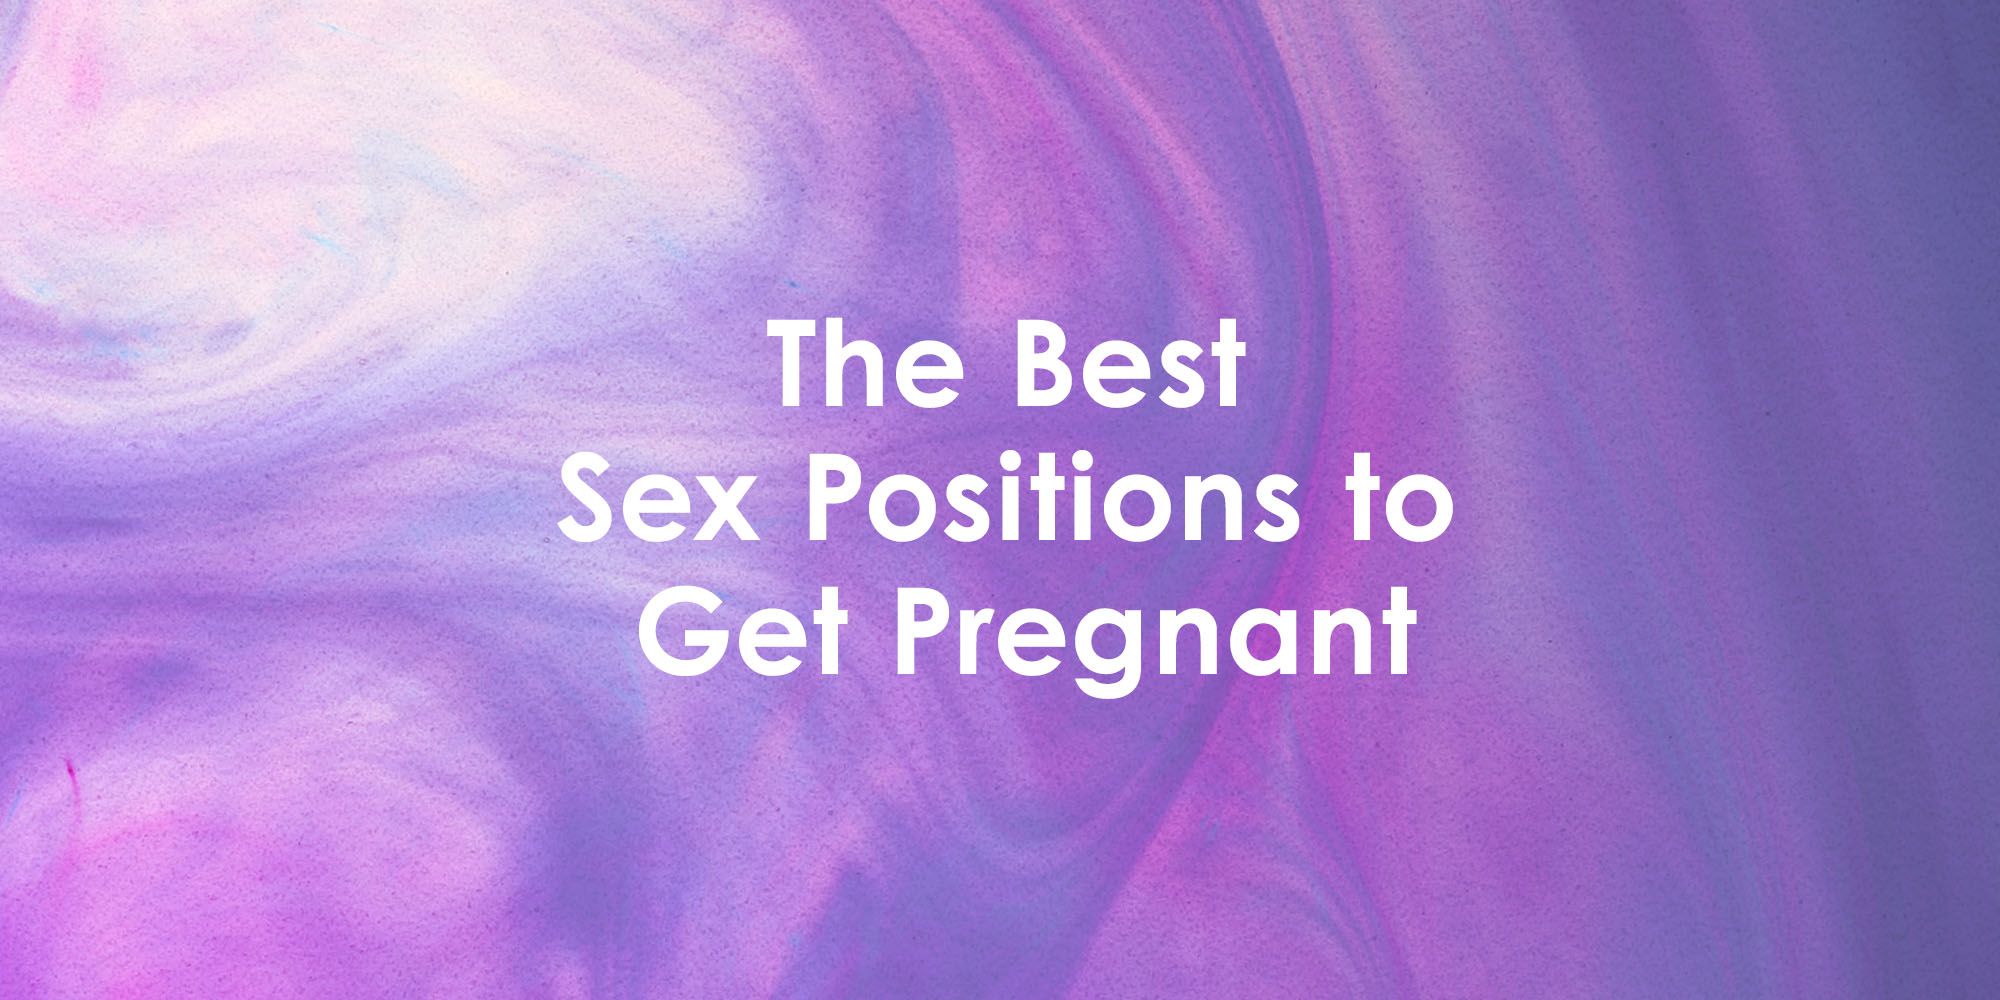 Sex Positions Sure to Get You Pregnant pic